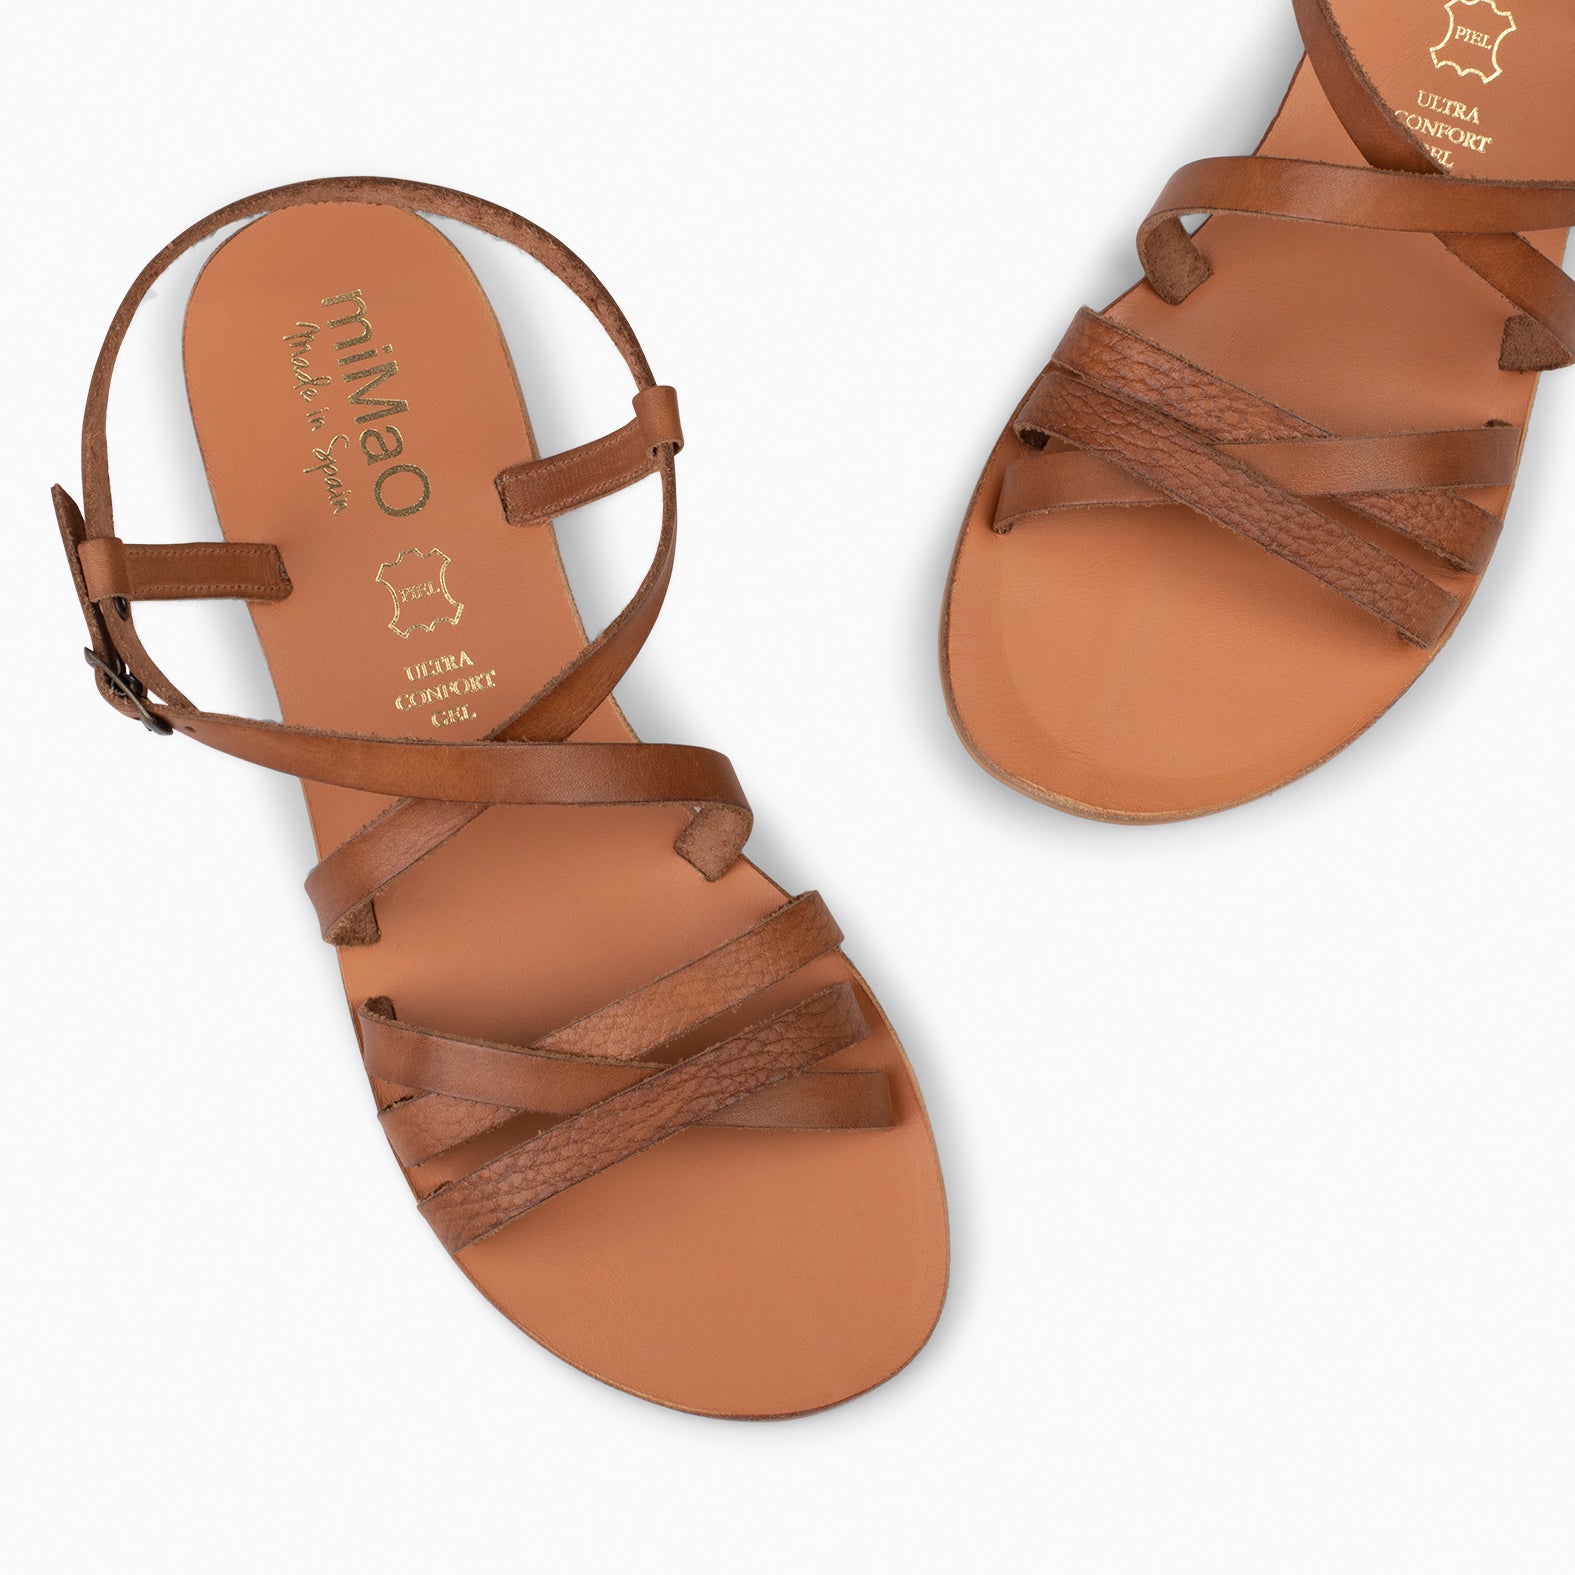 IXORA – CAMEL flat sandals with buckle